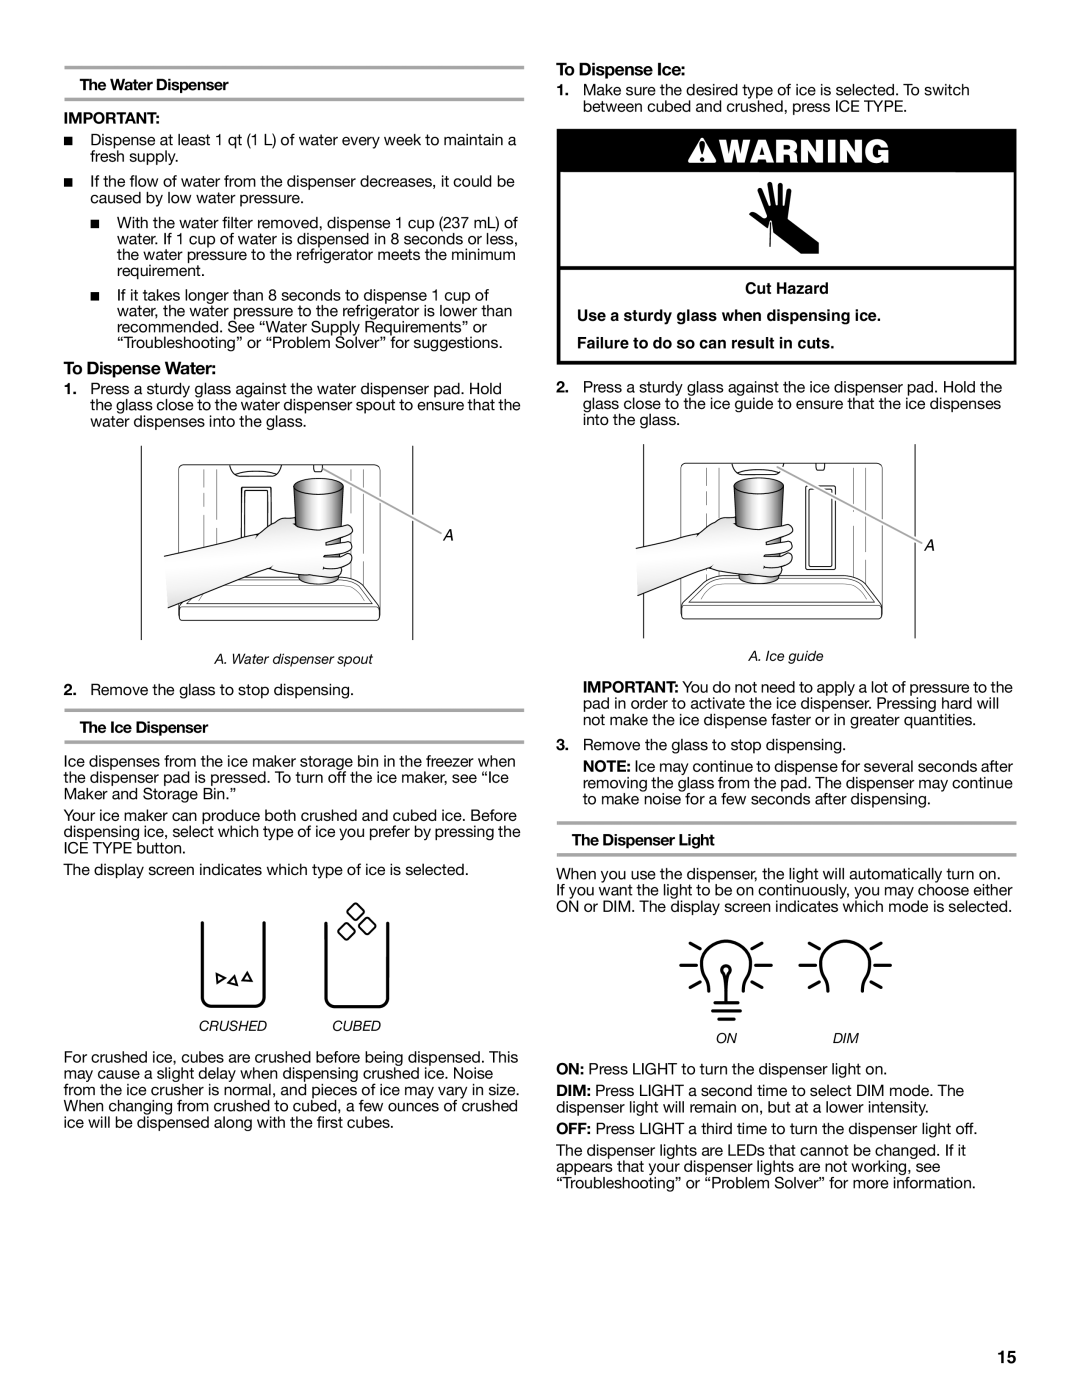 Whirlpool W10632883A To Dispense Water, To Dispense Ice, Cut Hazard Use a sturdy glass when dispensing ice 